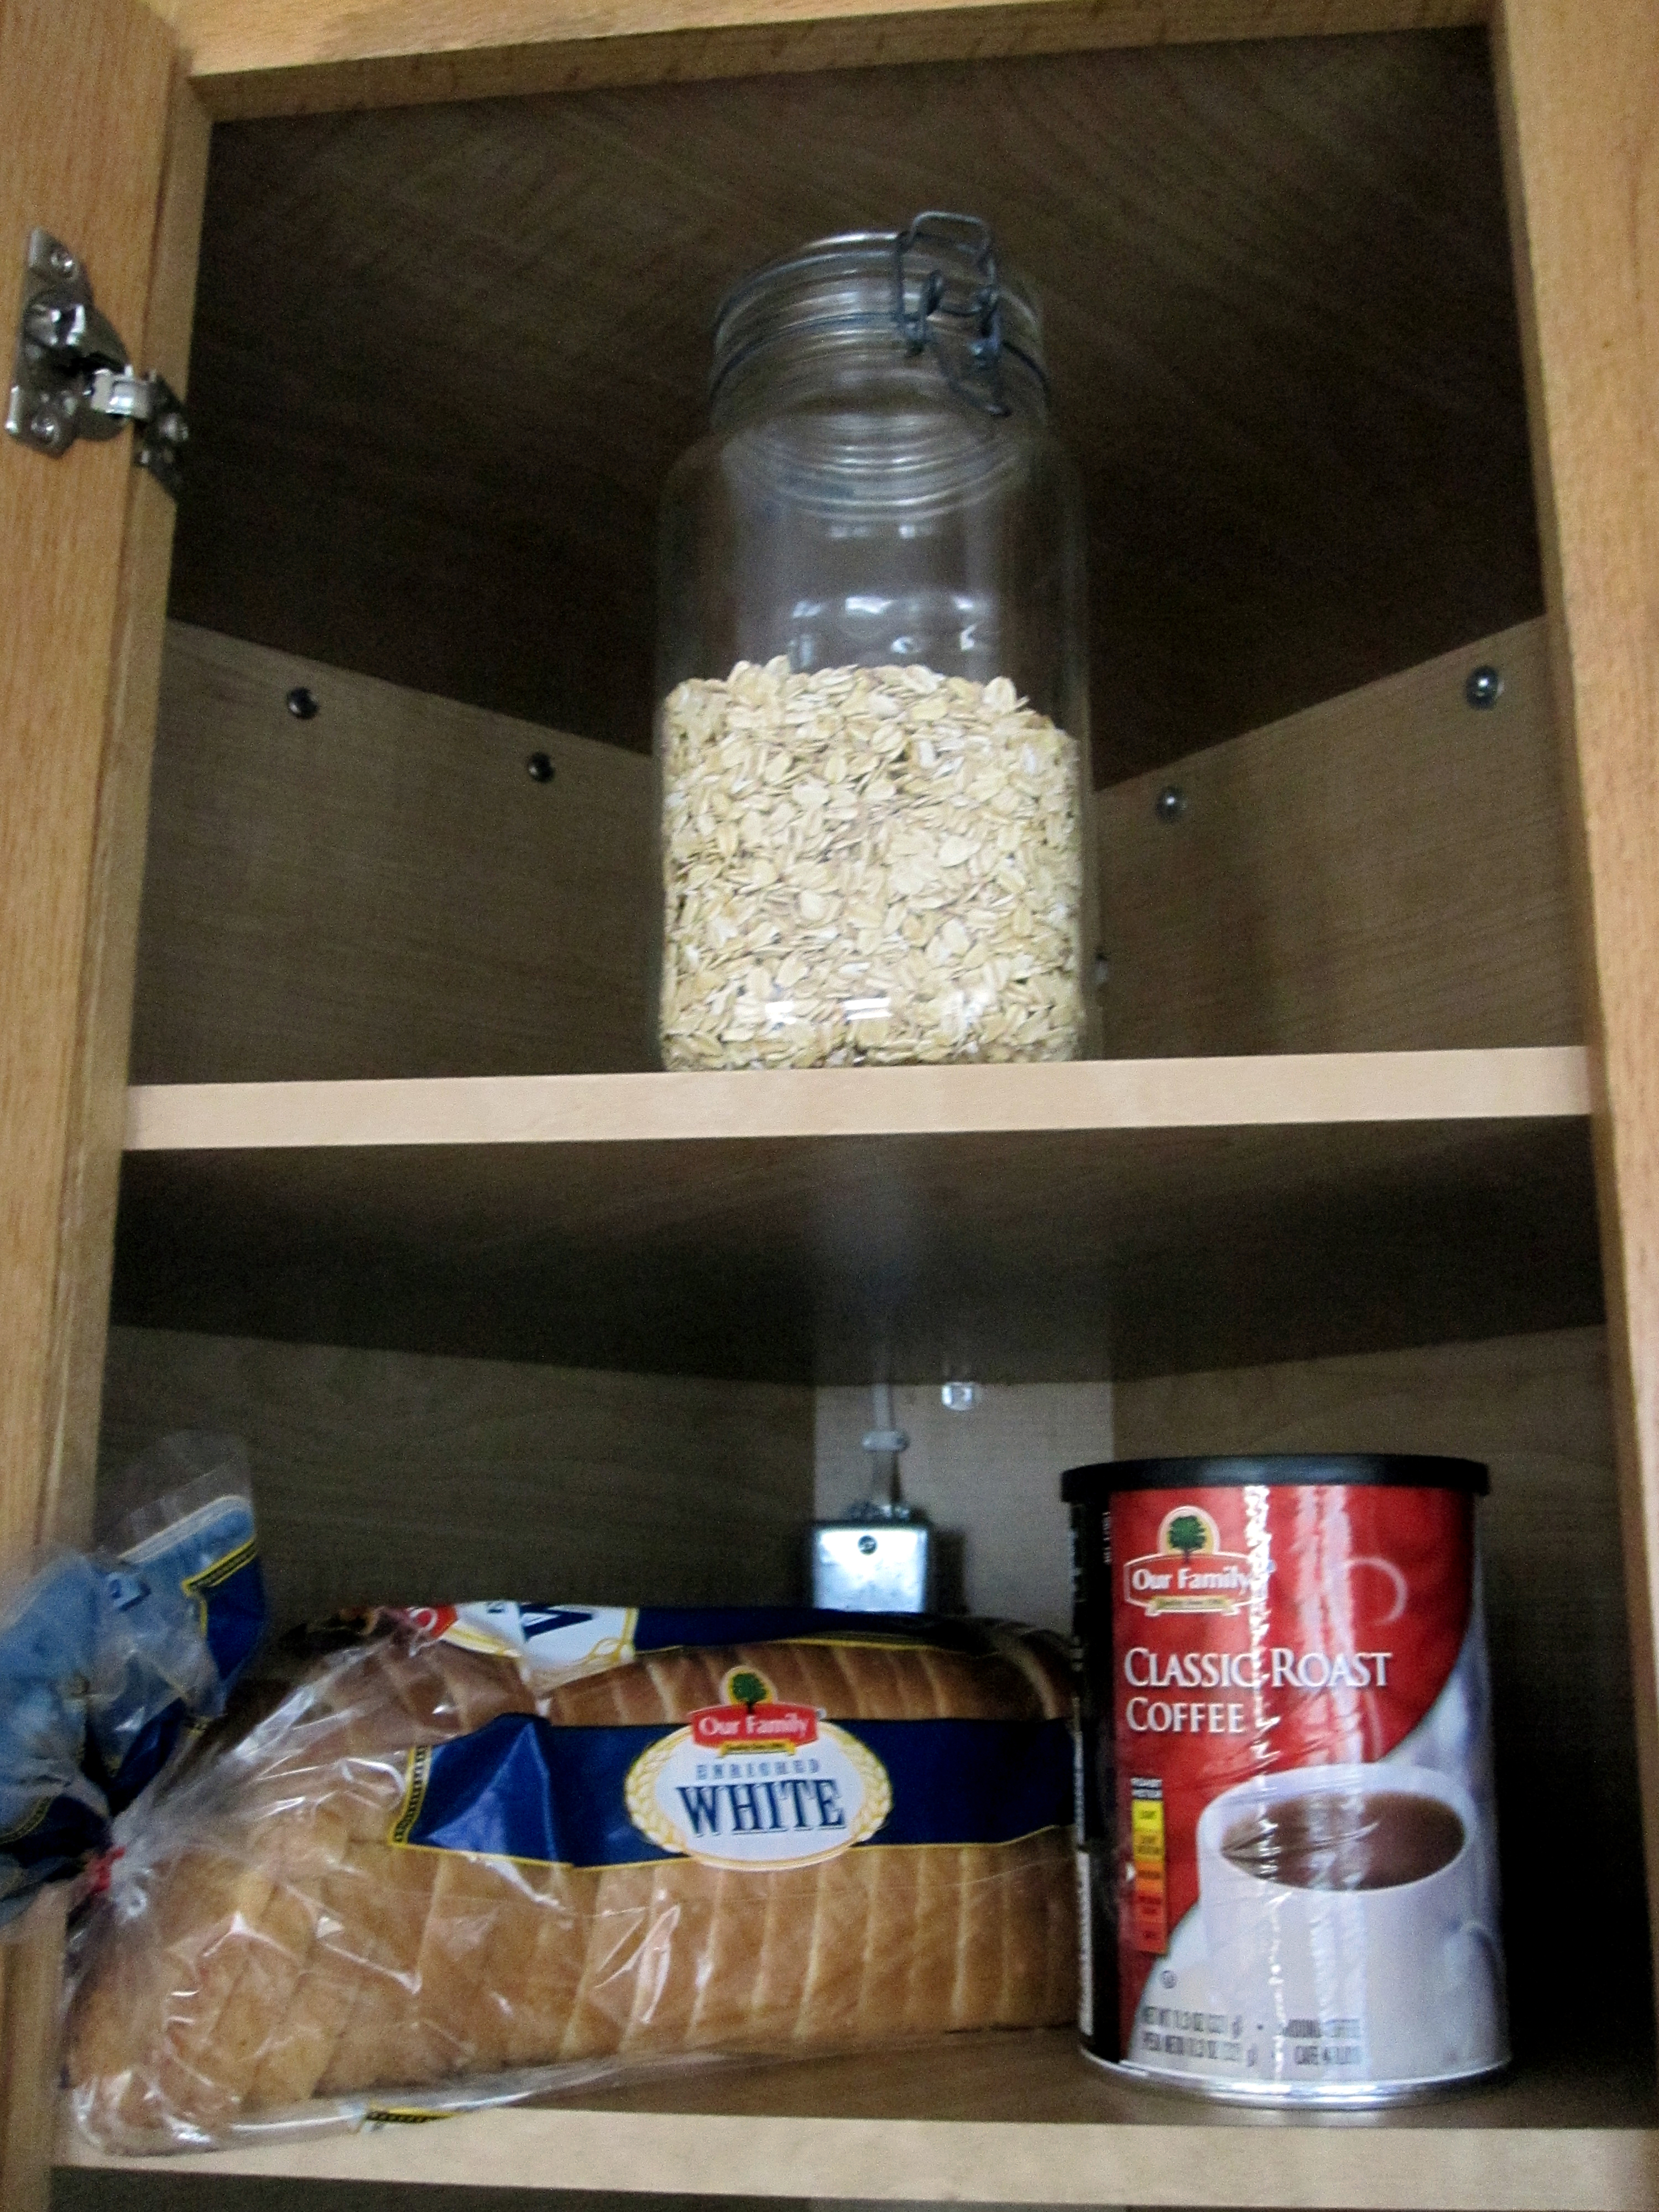 Many elderly in rural areas face barriers to accessing healthy food, and almost-empty cupboards are a common experience.